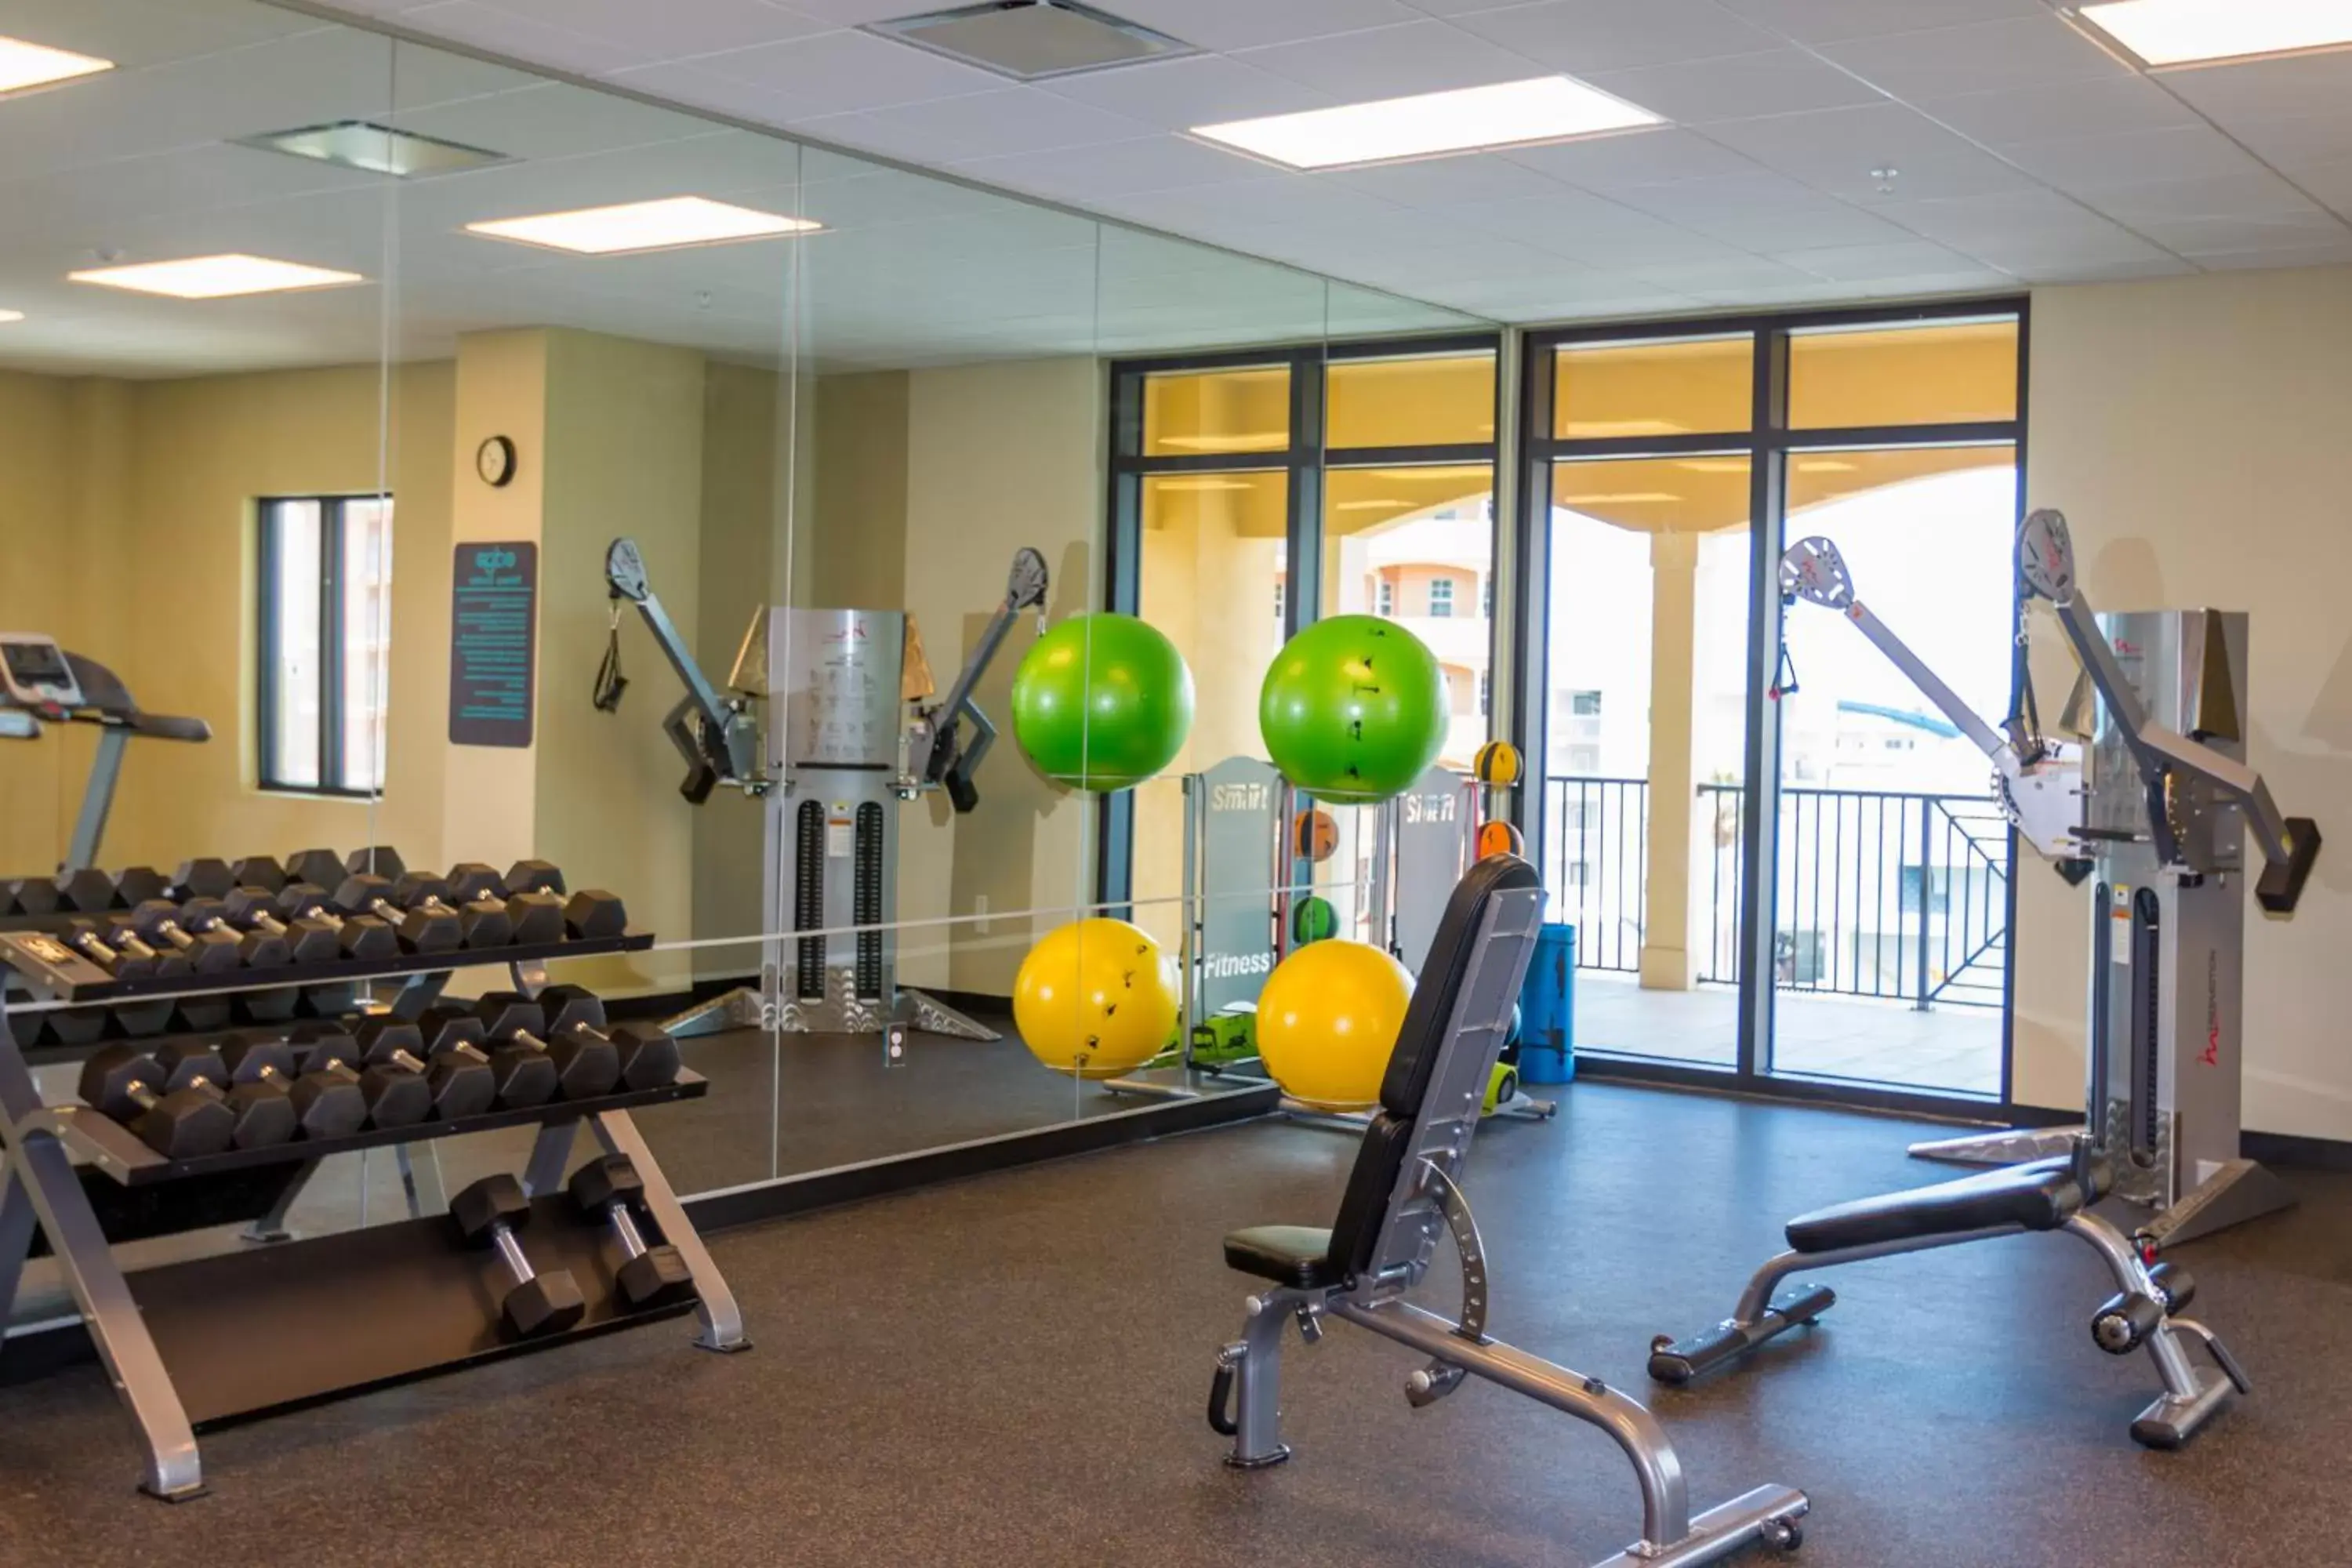 Fitness centre/facilities in Edge Hotel Clearwater Beach